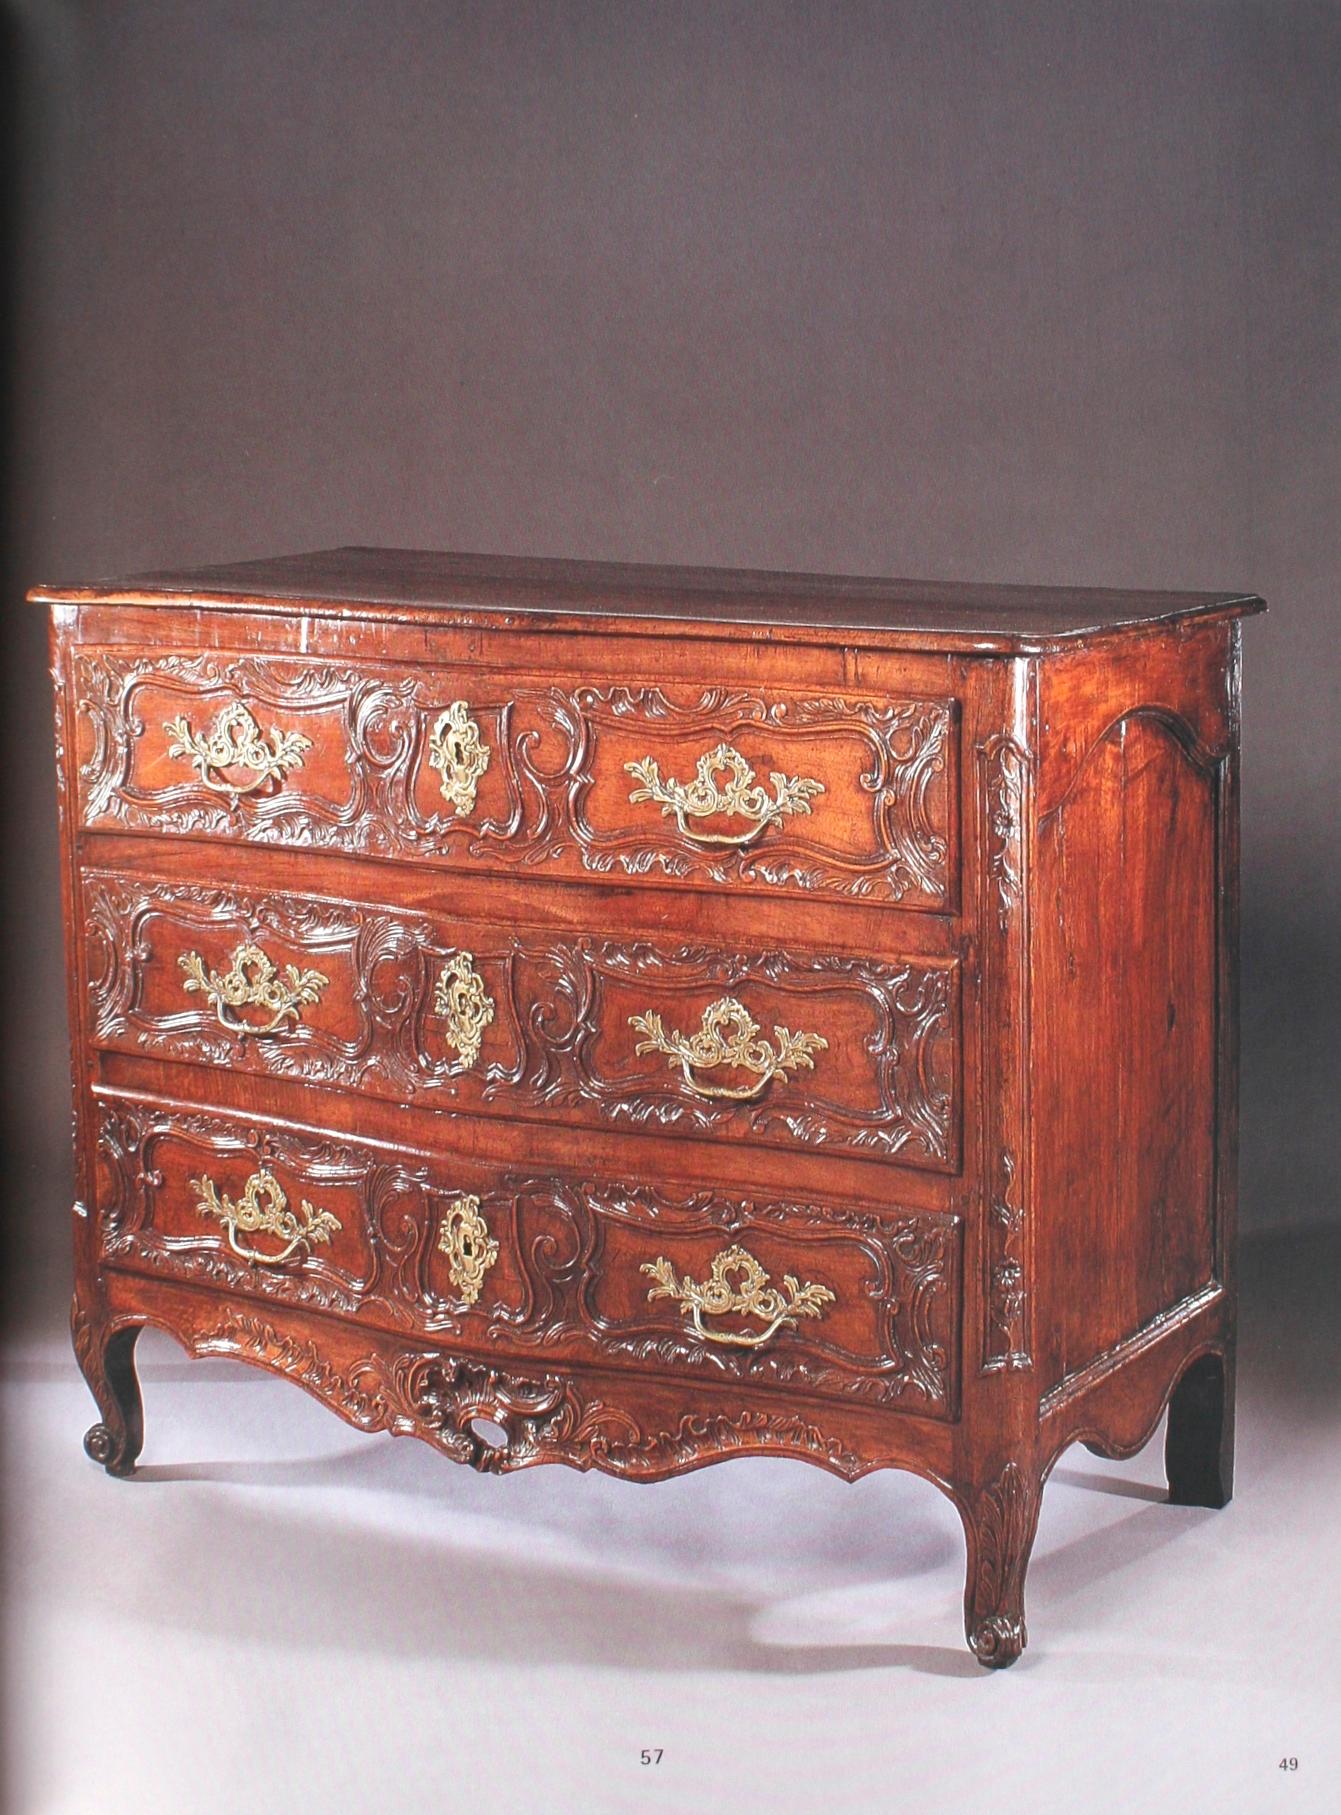 Christies avril 2002 French Furniture & Decorative Arts, a & C Fink Collections en vente 2